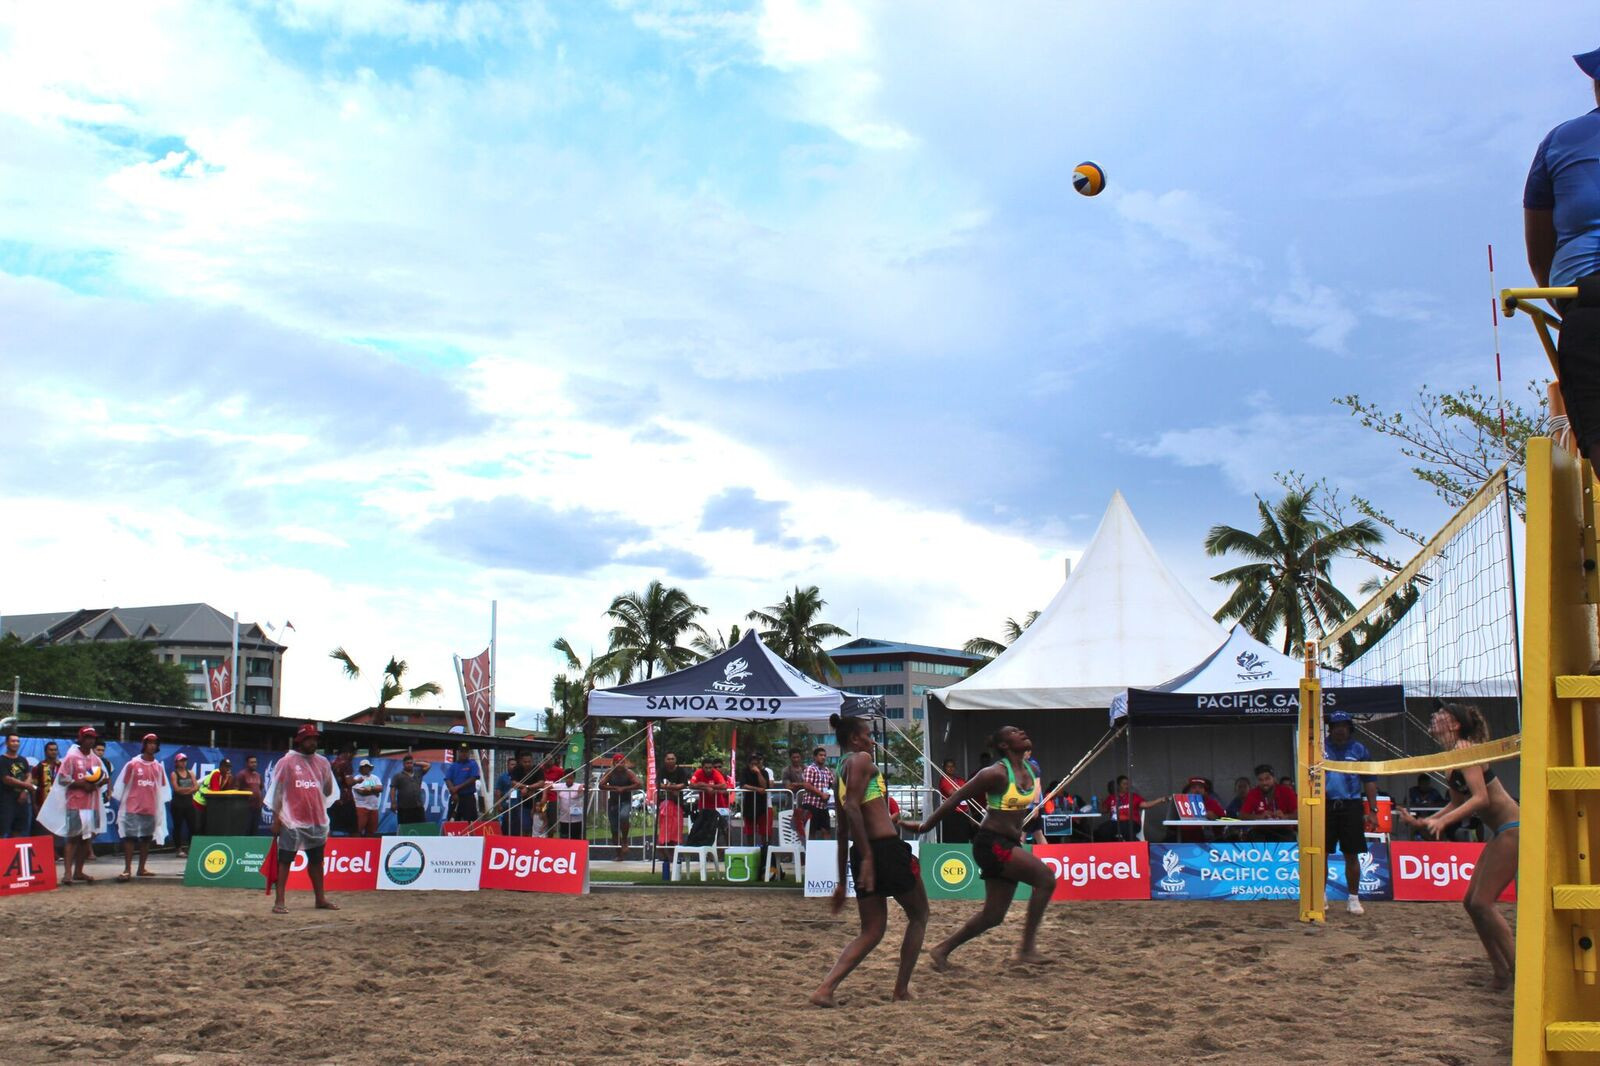 Vanuatu and Australia face off in the beach volleyball under big blue skies ©Games News Service